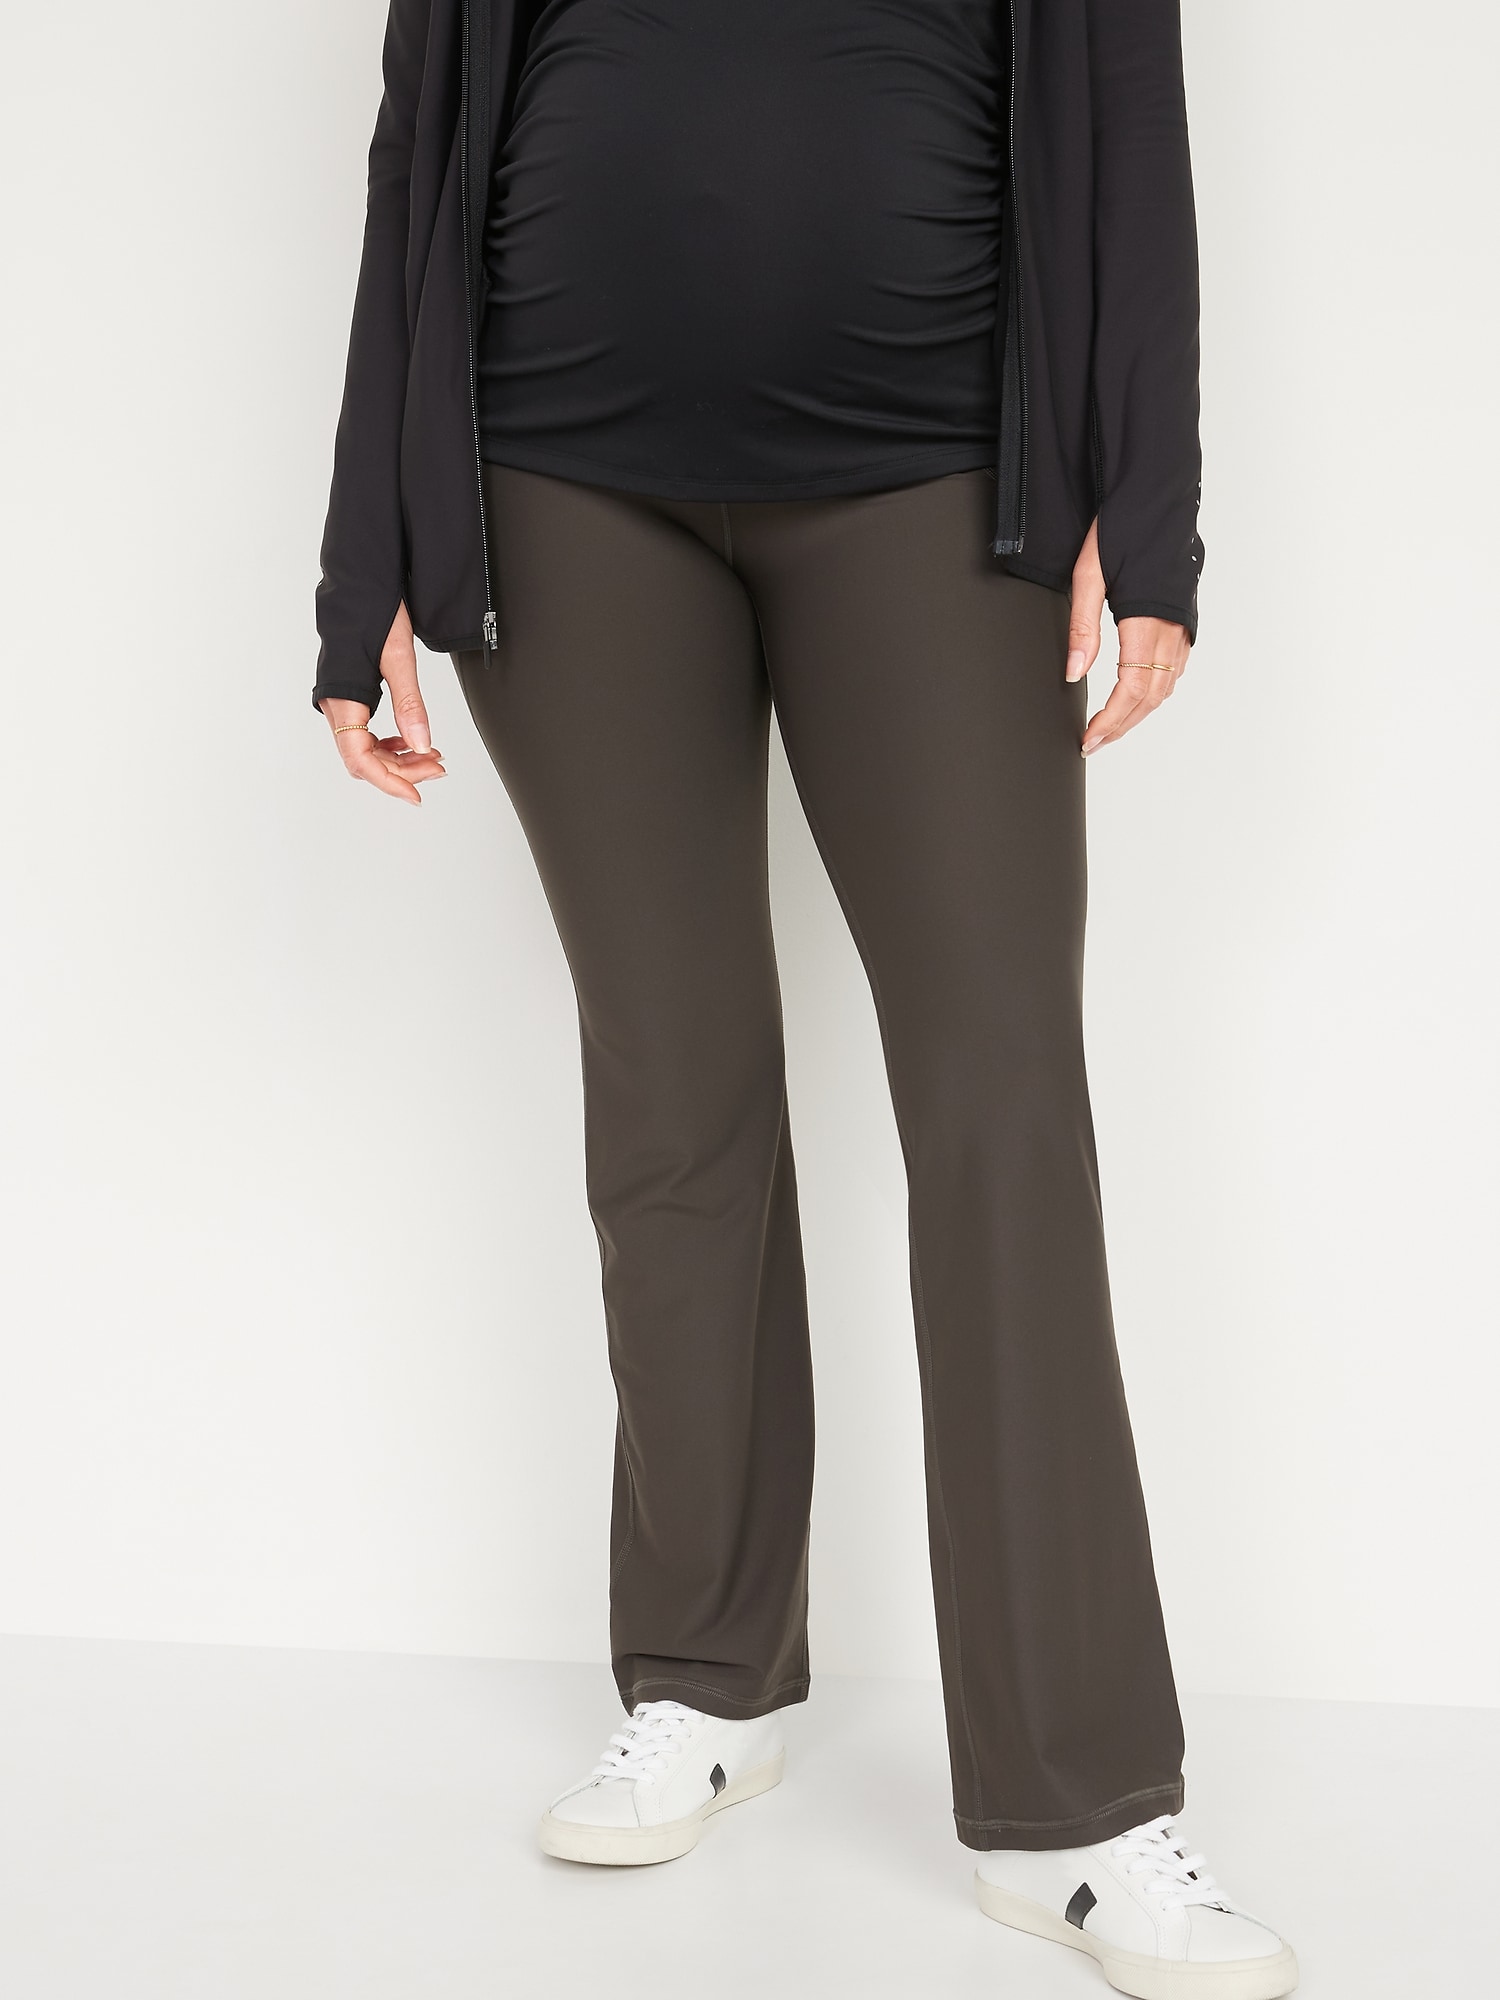 Old Navy, Pants & Jumpsuits, Old Navy Powersoft Maternity Leggings